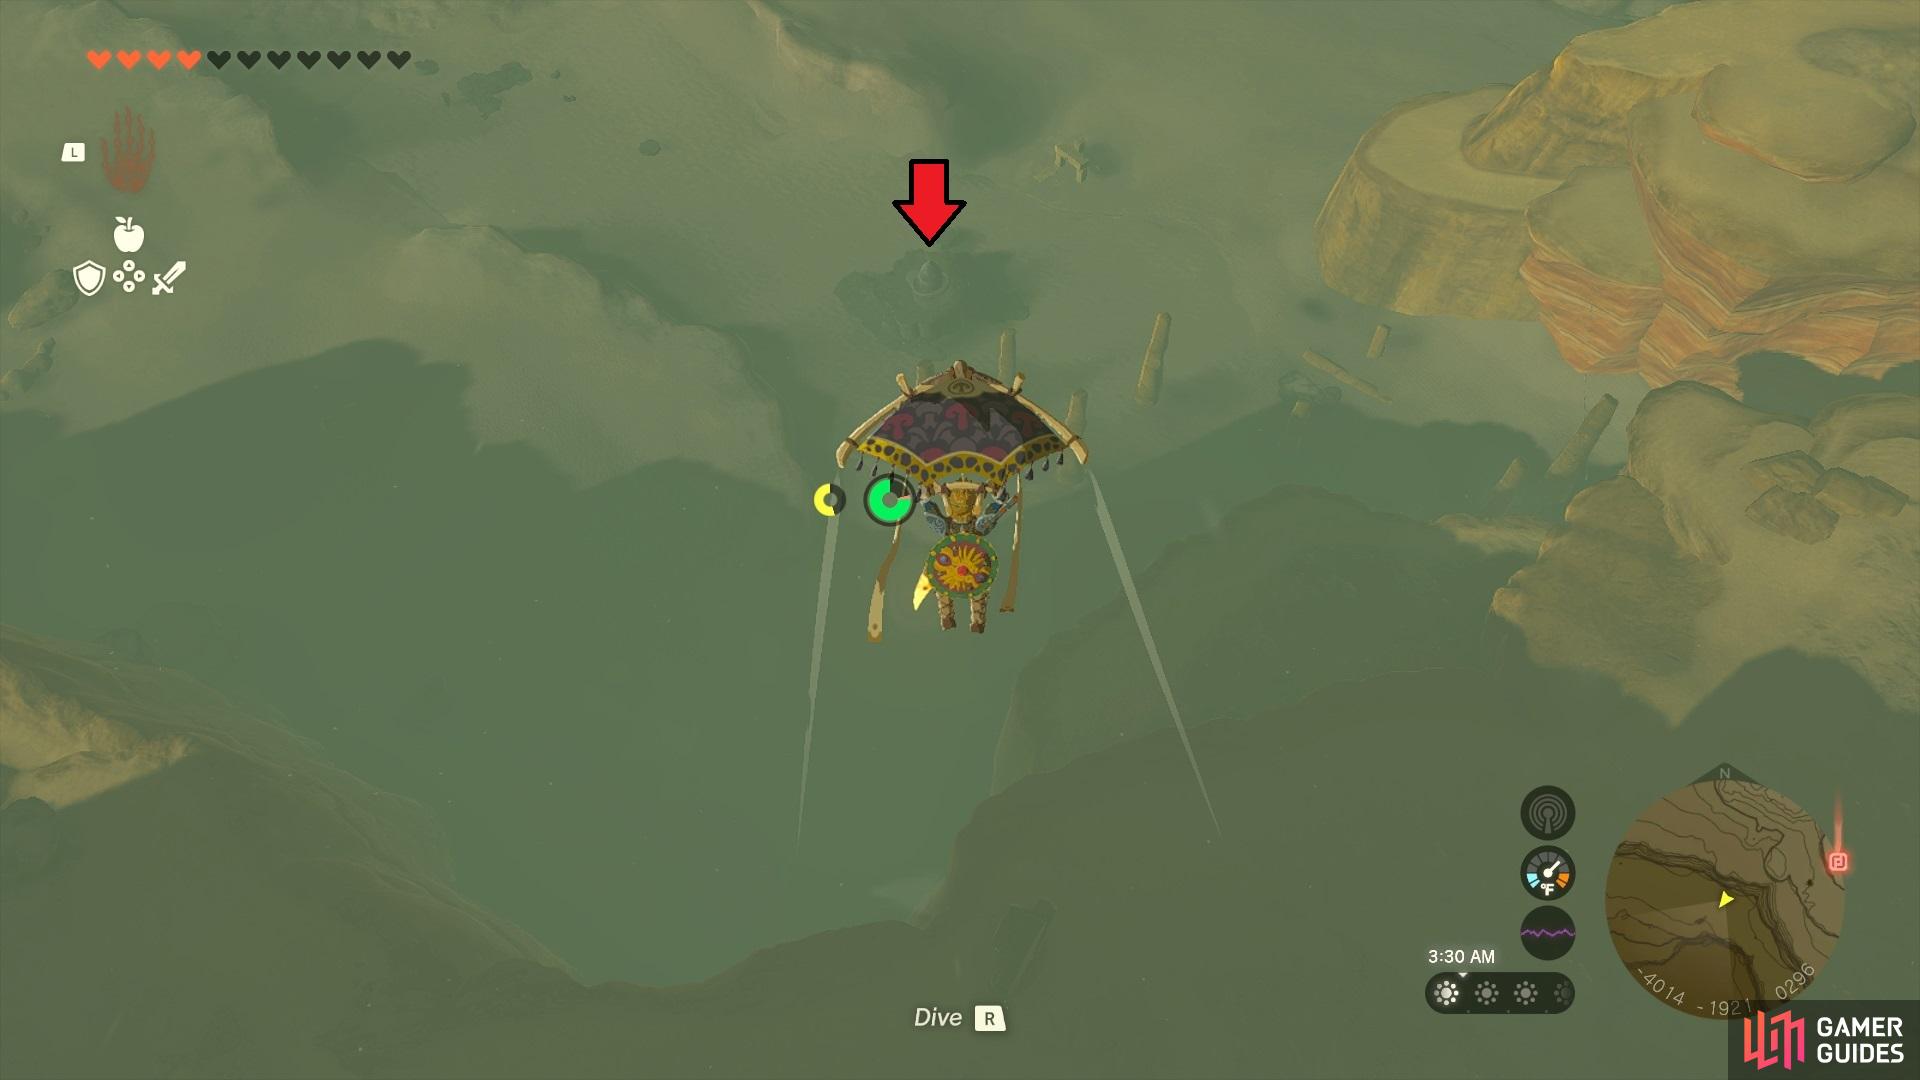 It’s easiest to get to the shrine by gliding down from higher up.